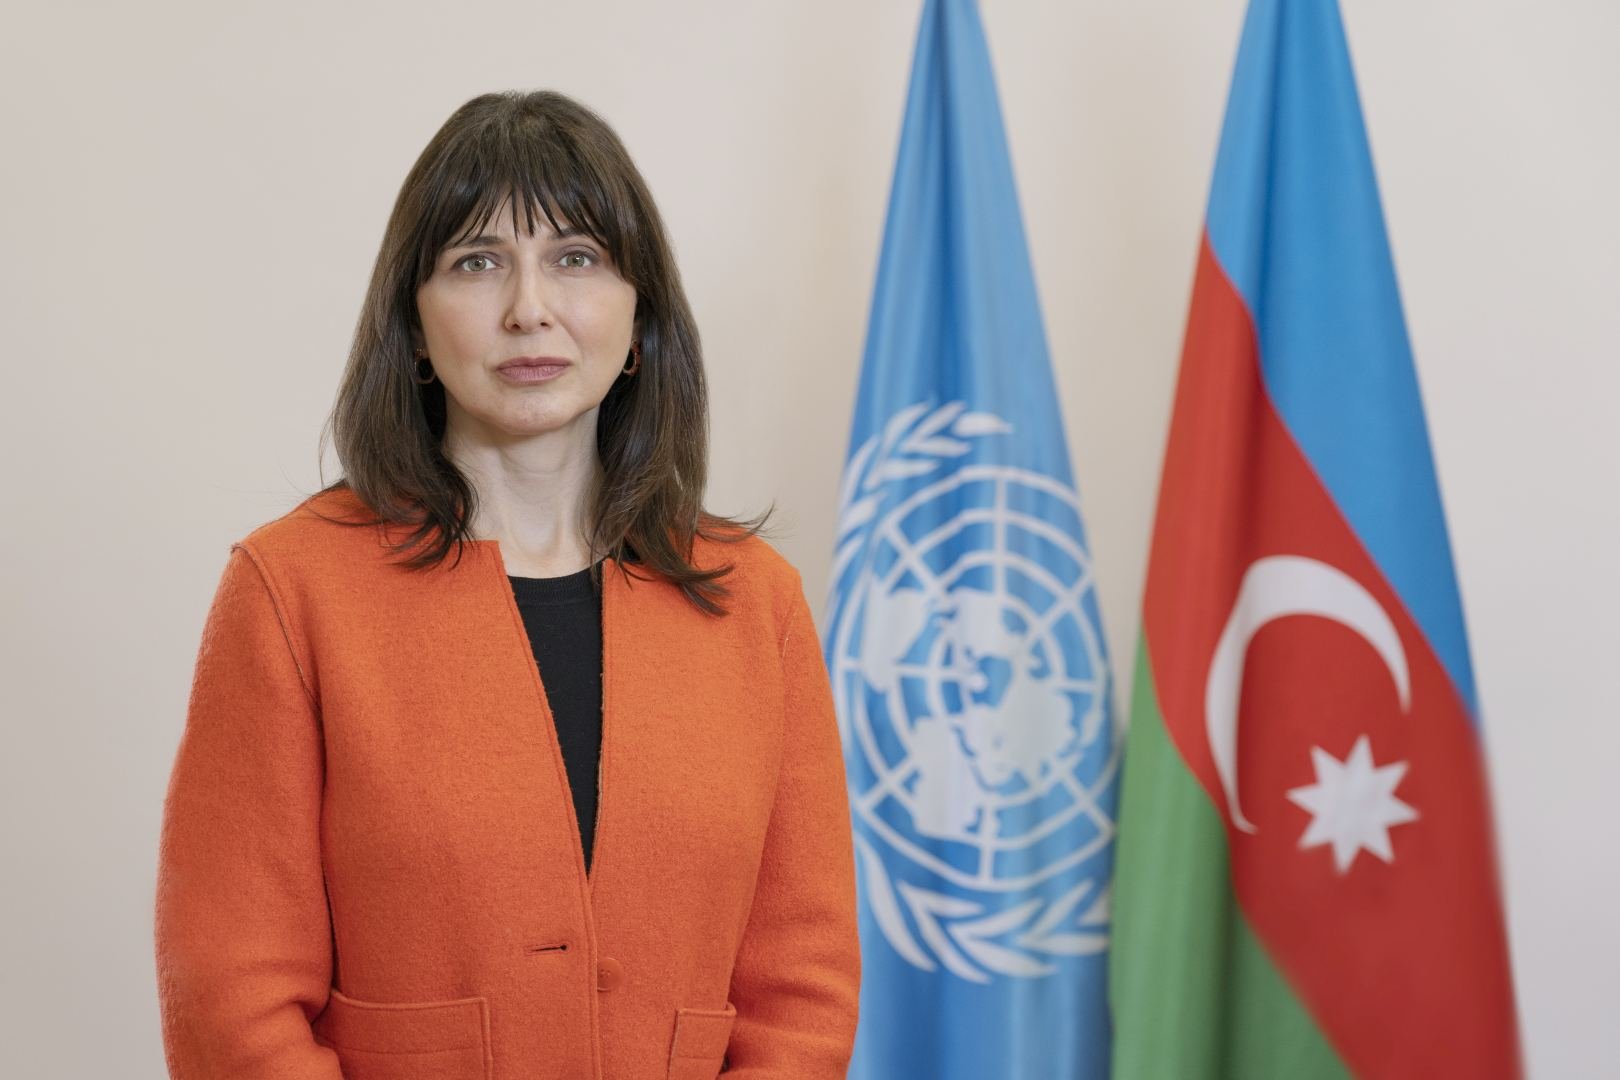 Azerbaijan becomes one of first countries included in UN migration network - official